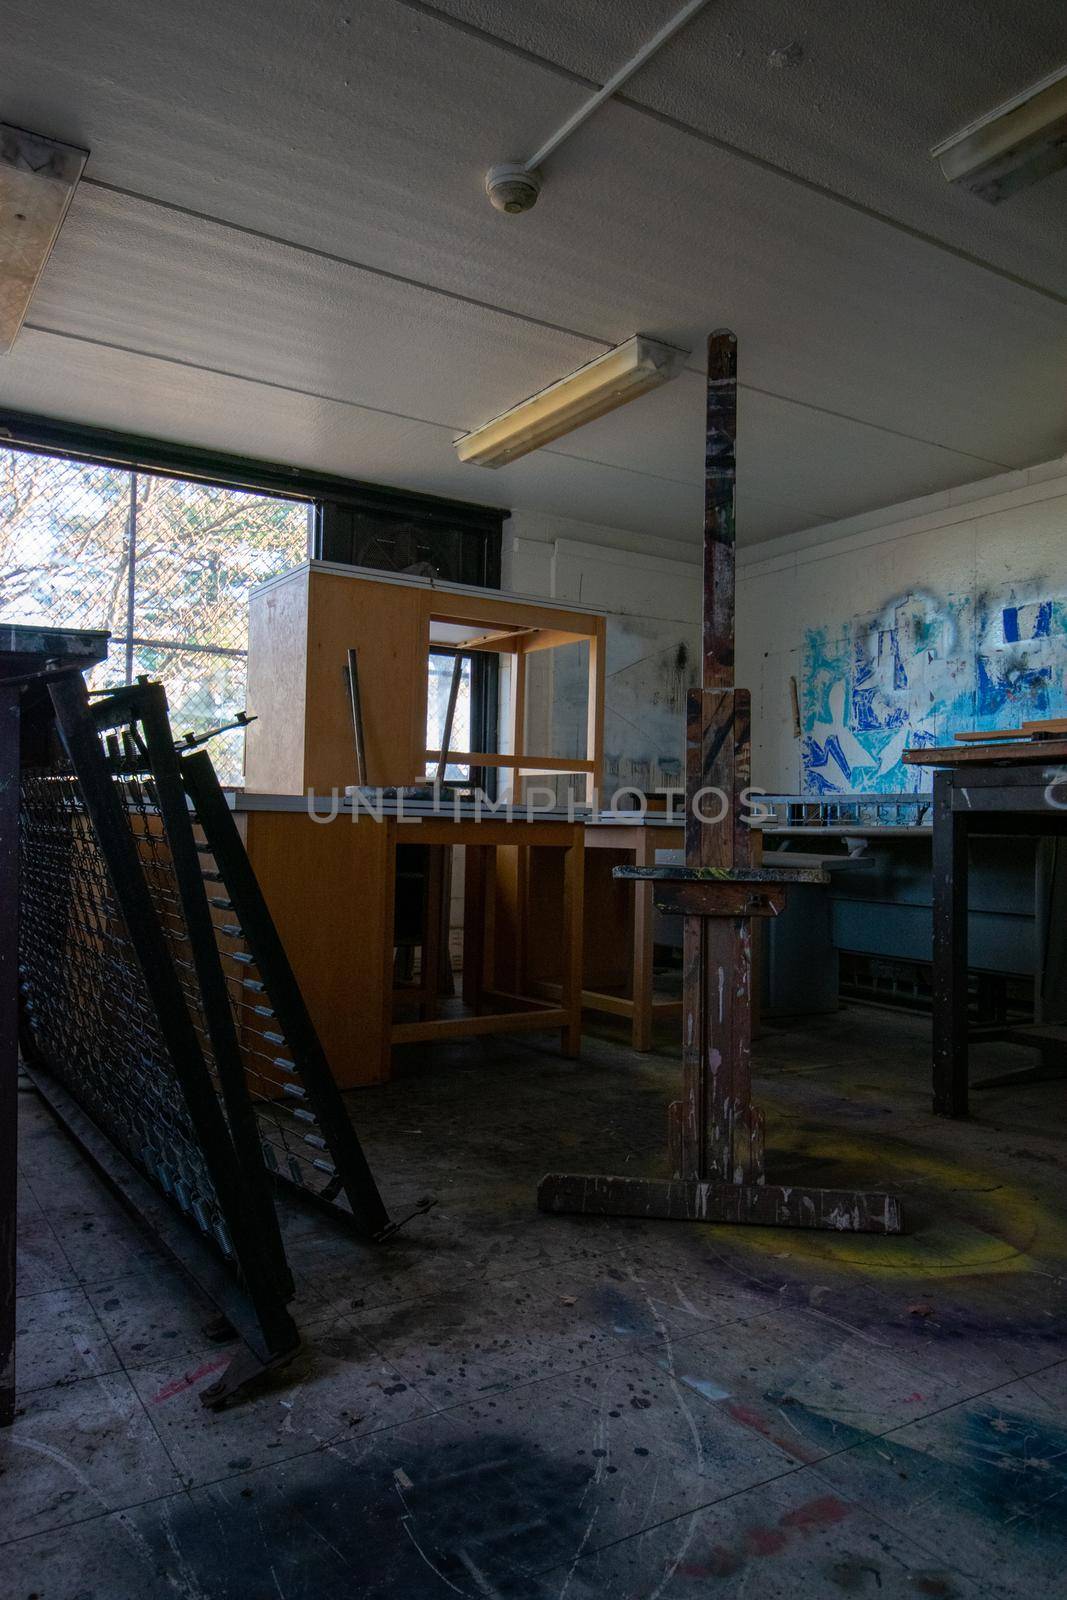 An Abandoned Art Studio in a School With an Easel In It by bju12290